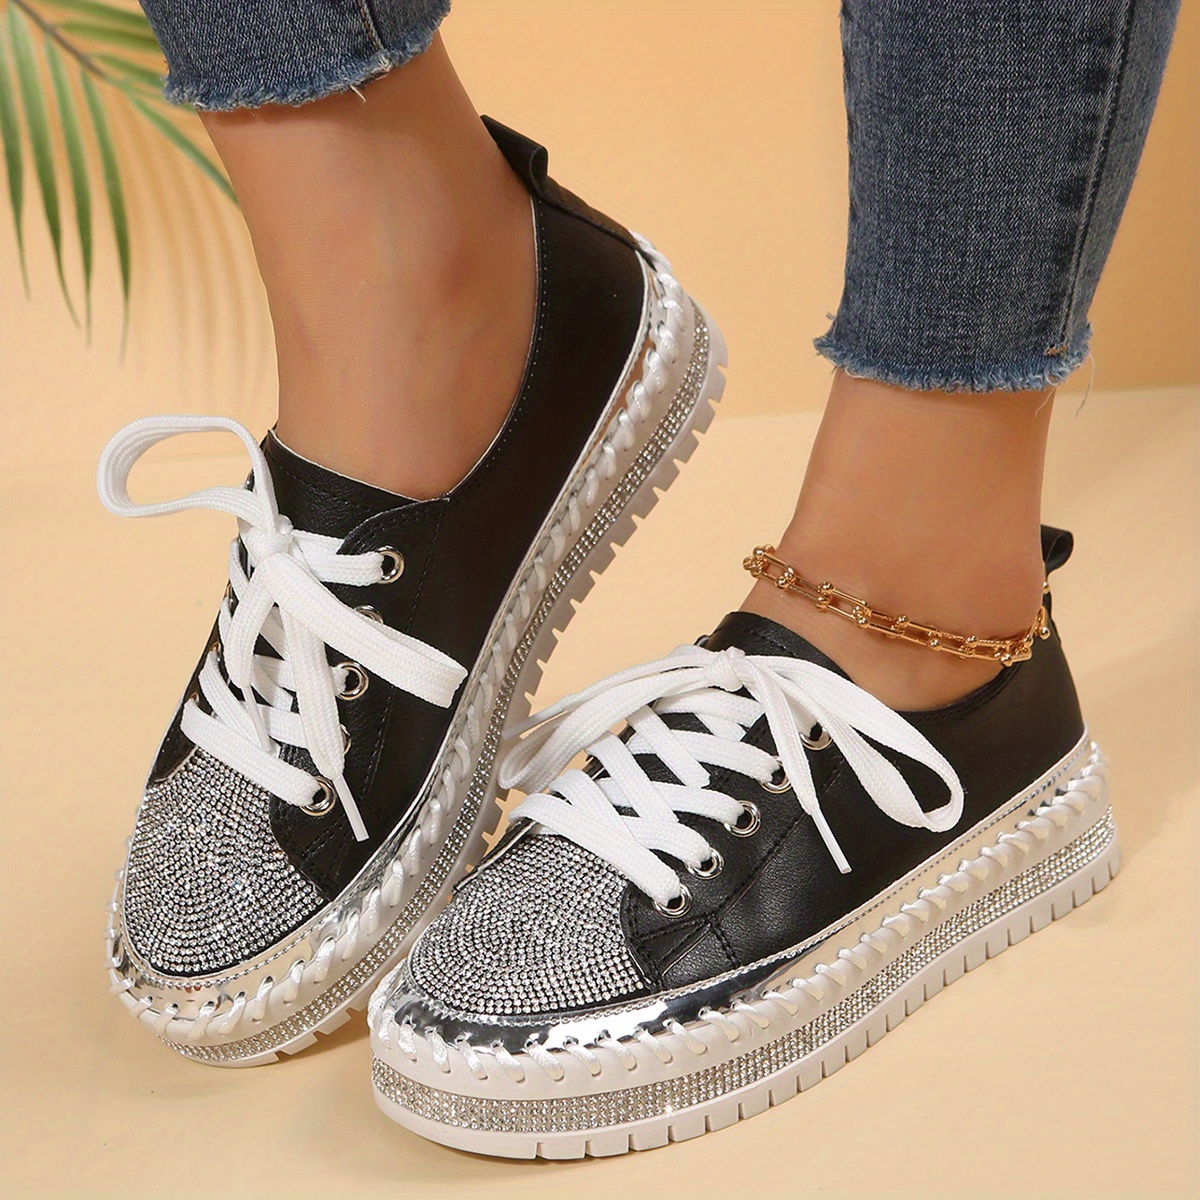 Women Sneakers Lace Up Platform Casual Sport Shoes Shine Rhinestone  Decoration Shoes Outdoor Running Tennis Shoe